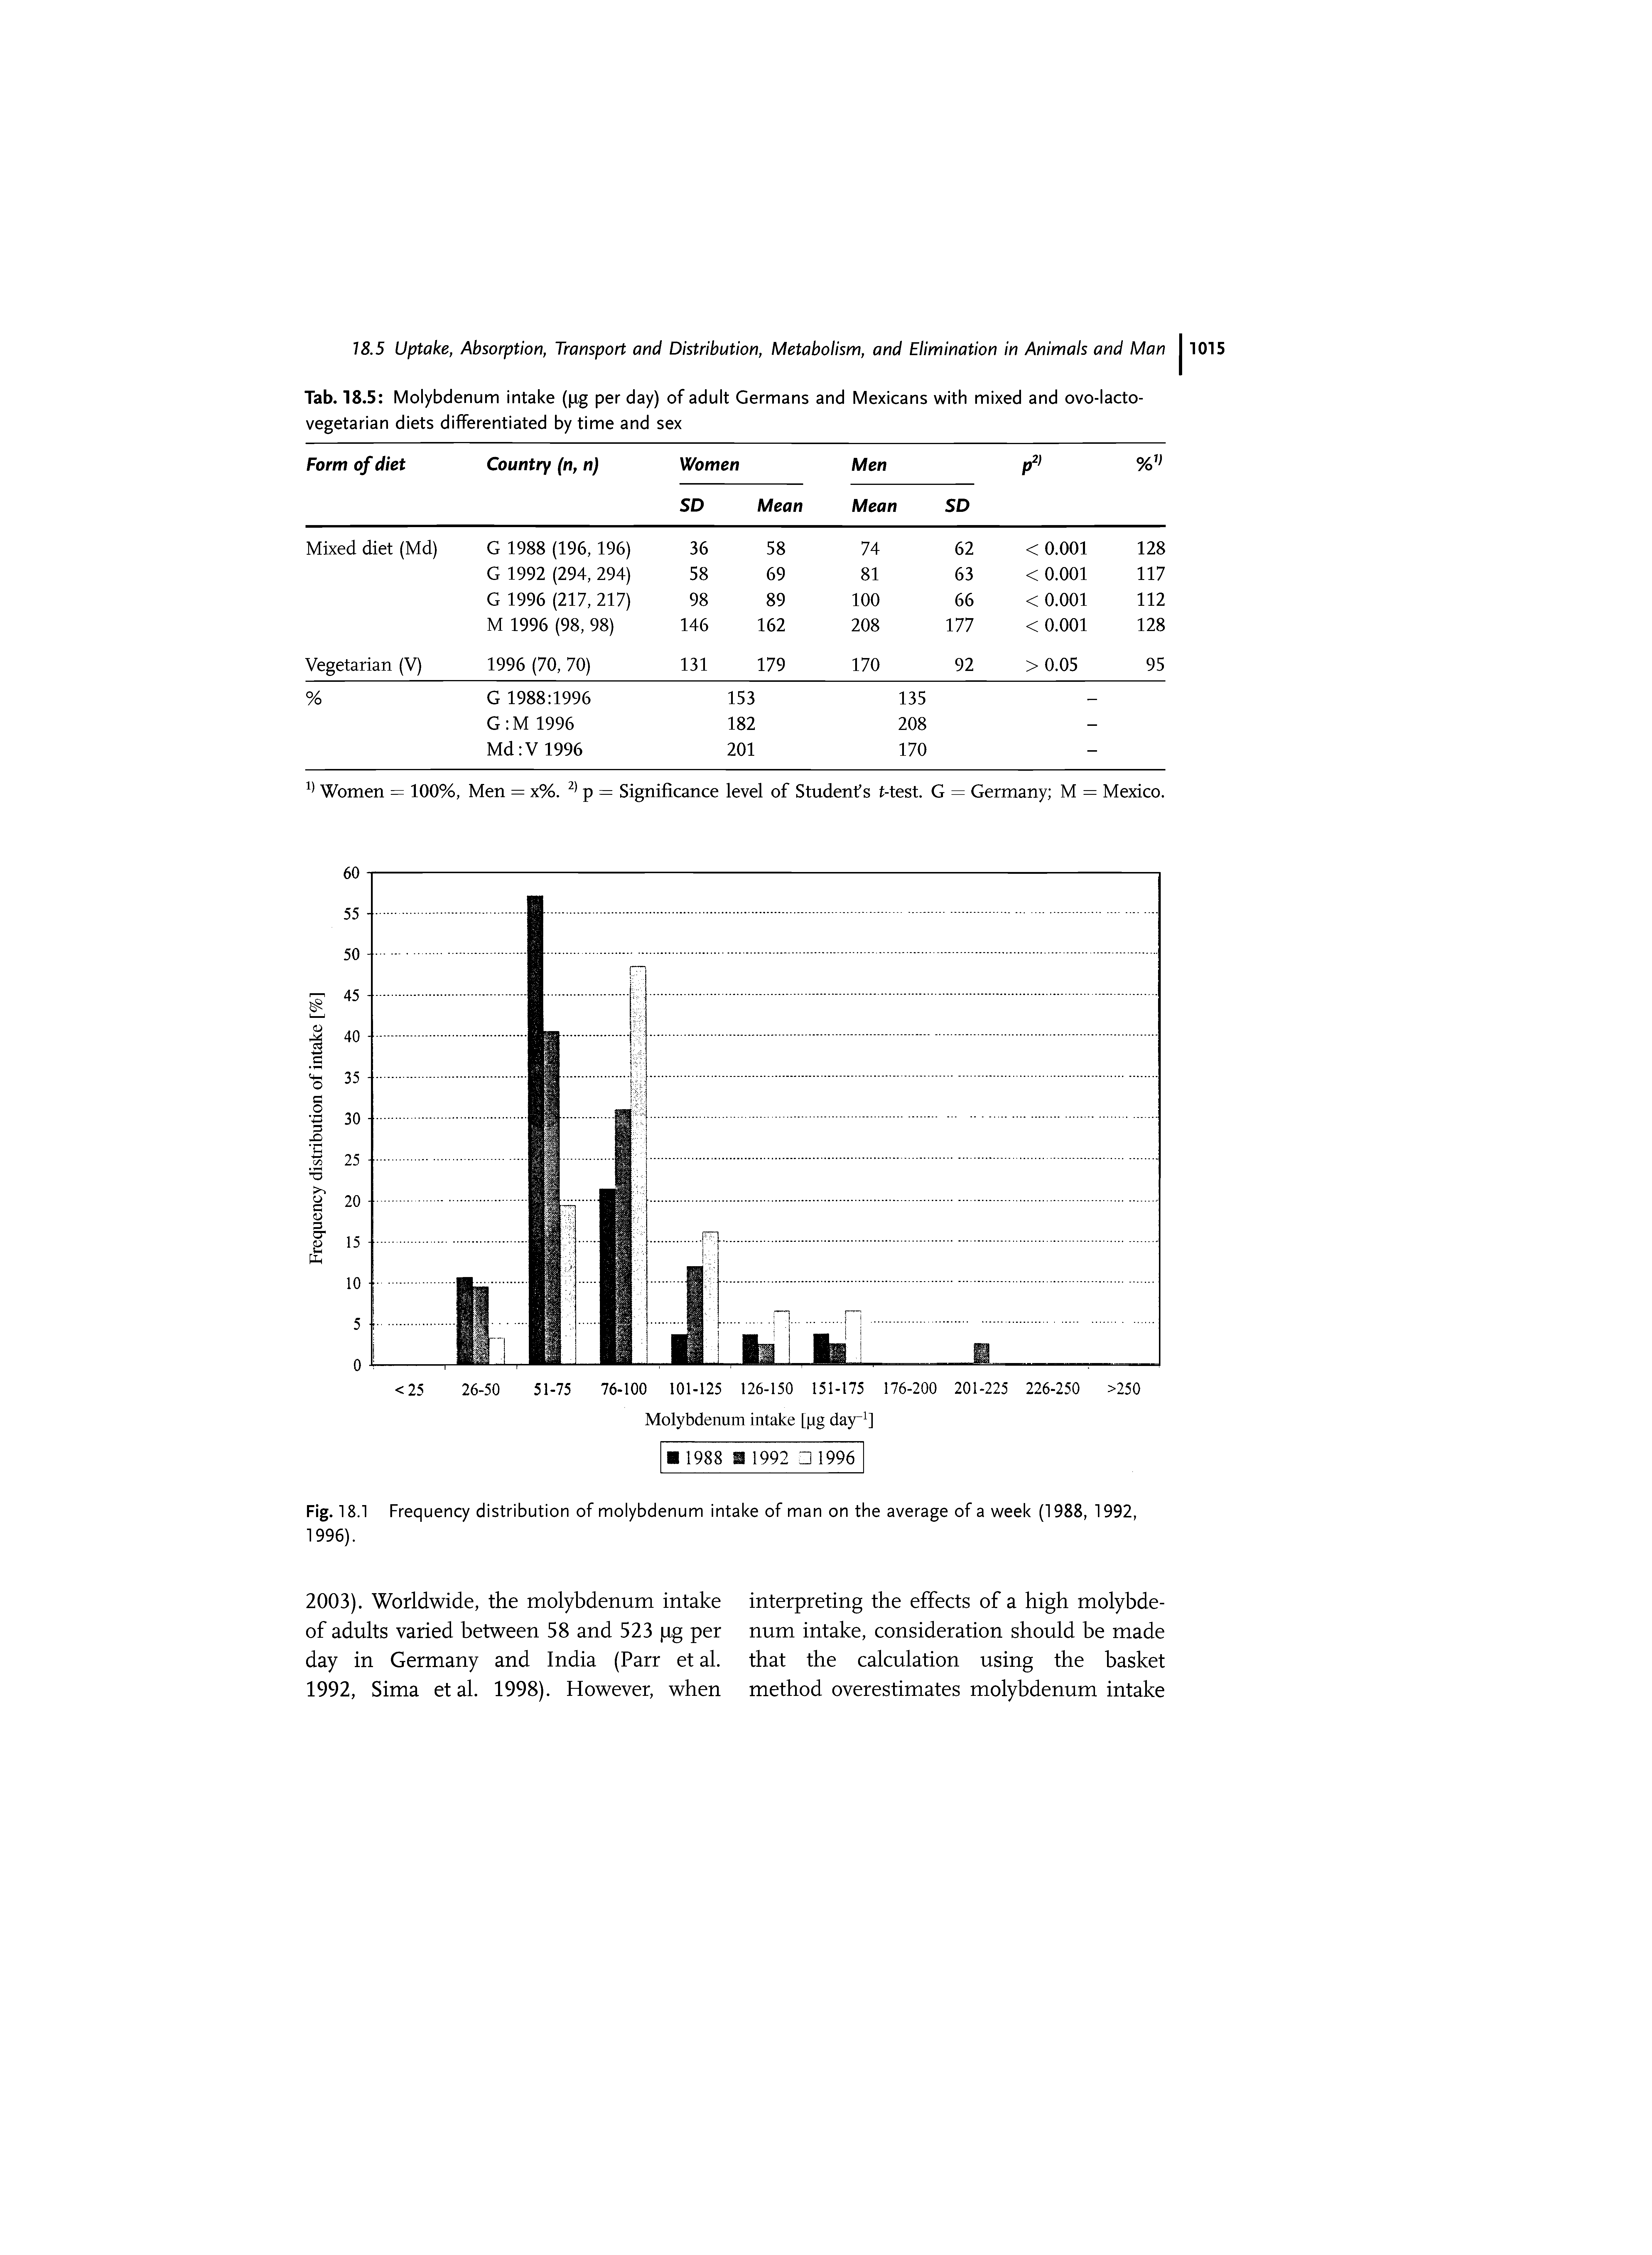 Fig. 18.1 Frequency distribution of molybdenum intake of man on the average of a week (1988, 1992, 1996).